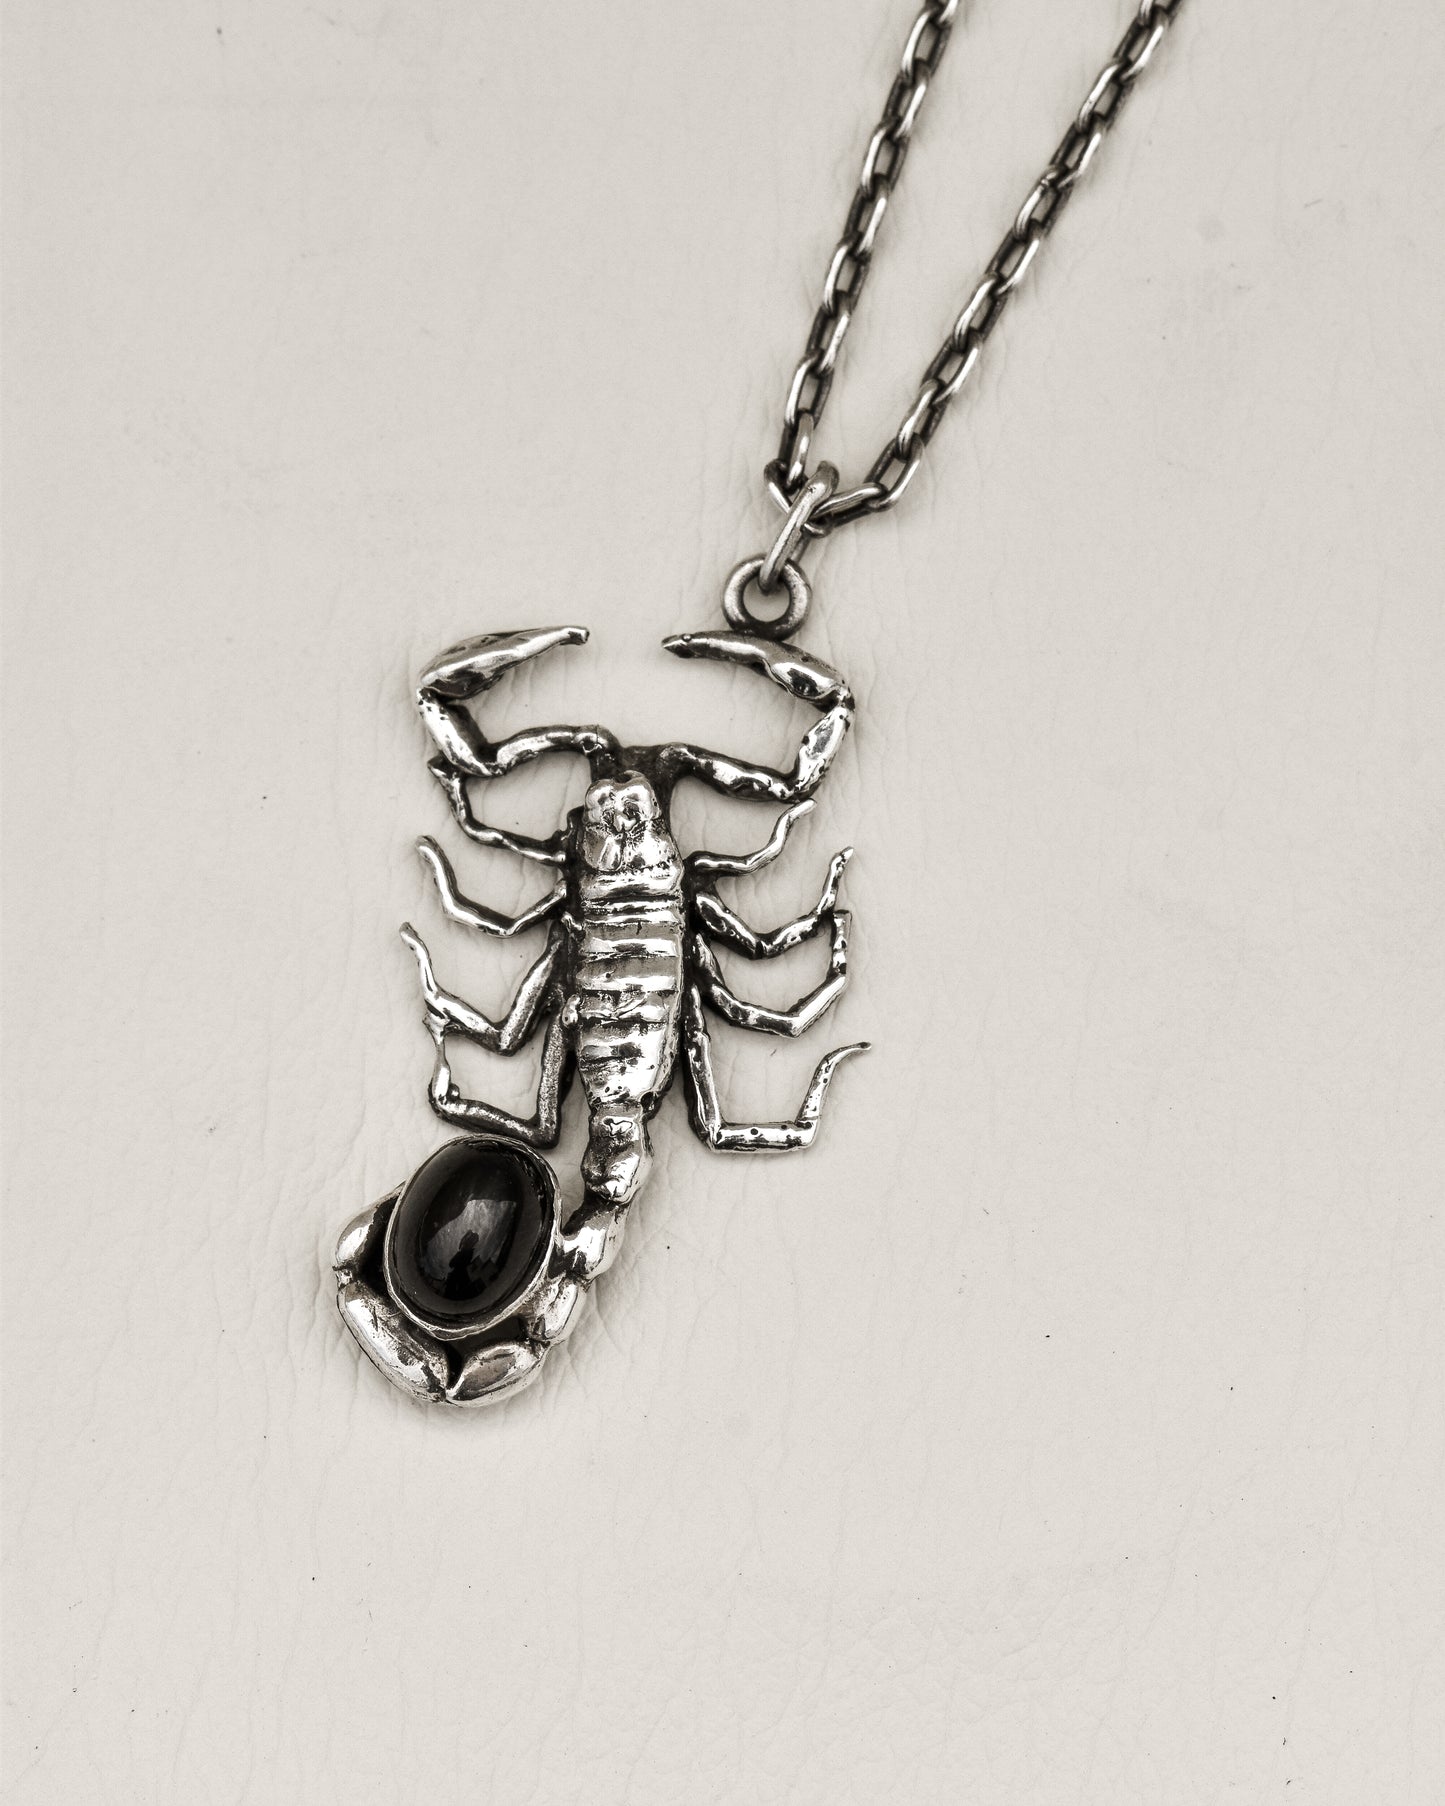 The Small Poison Sting Necklace